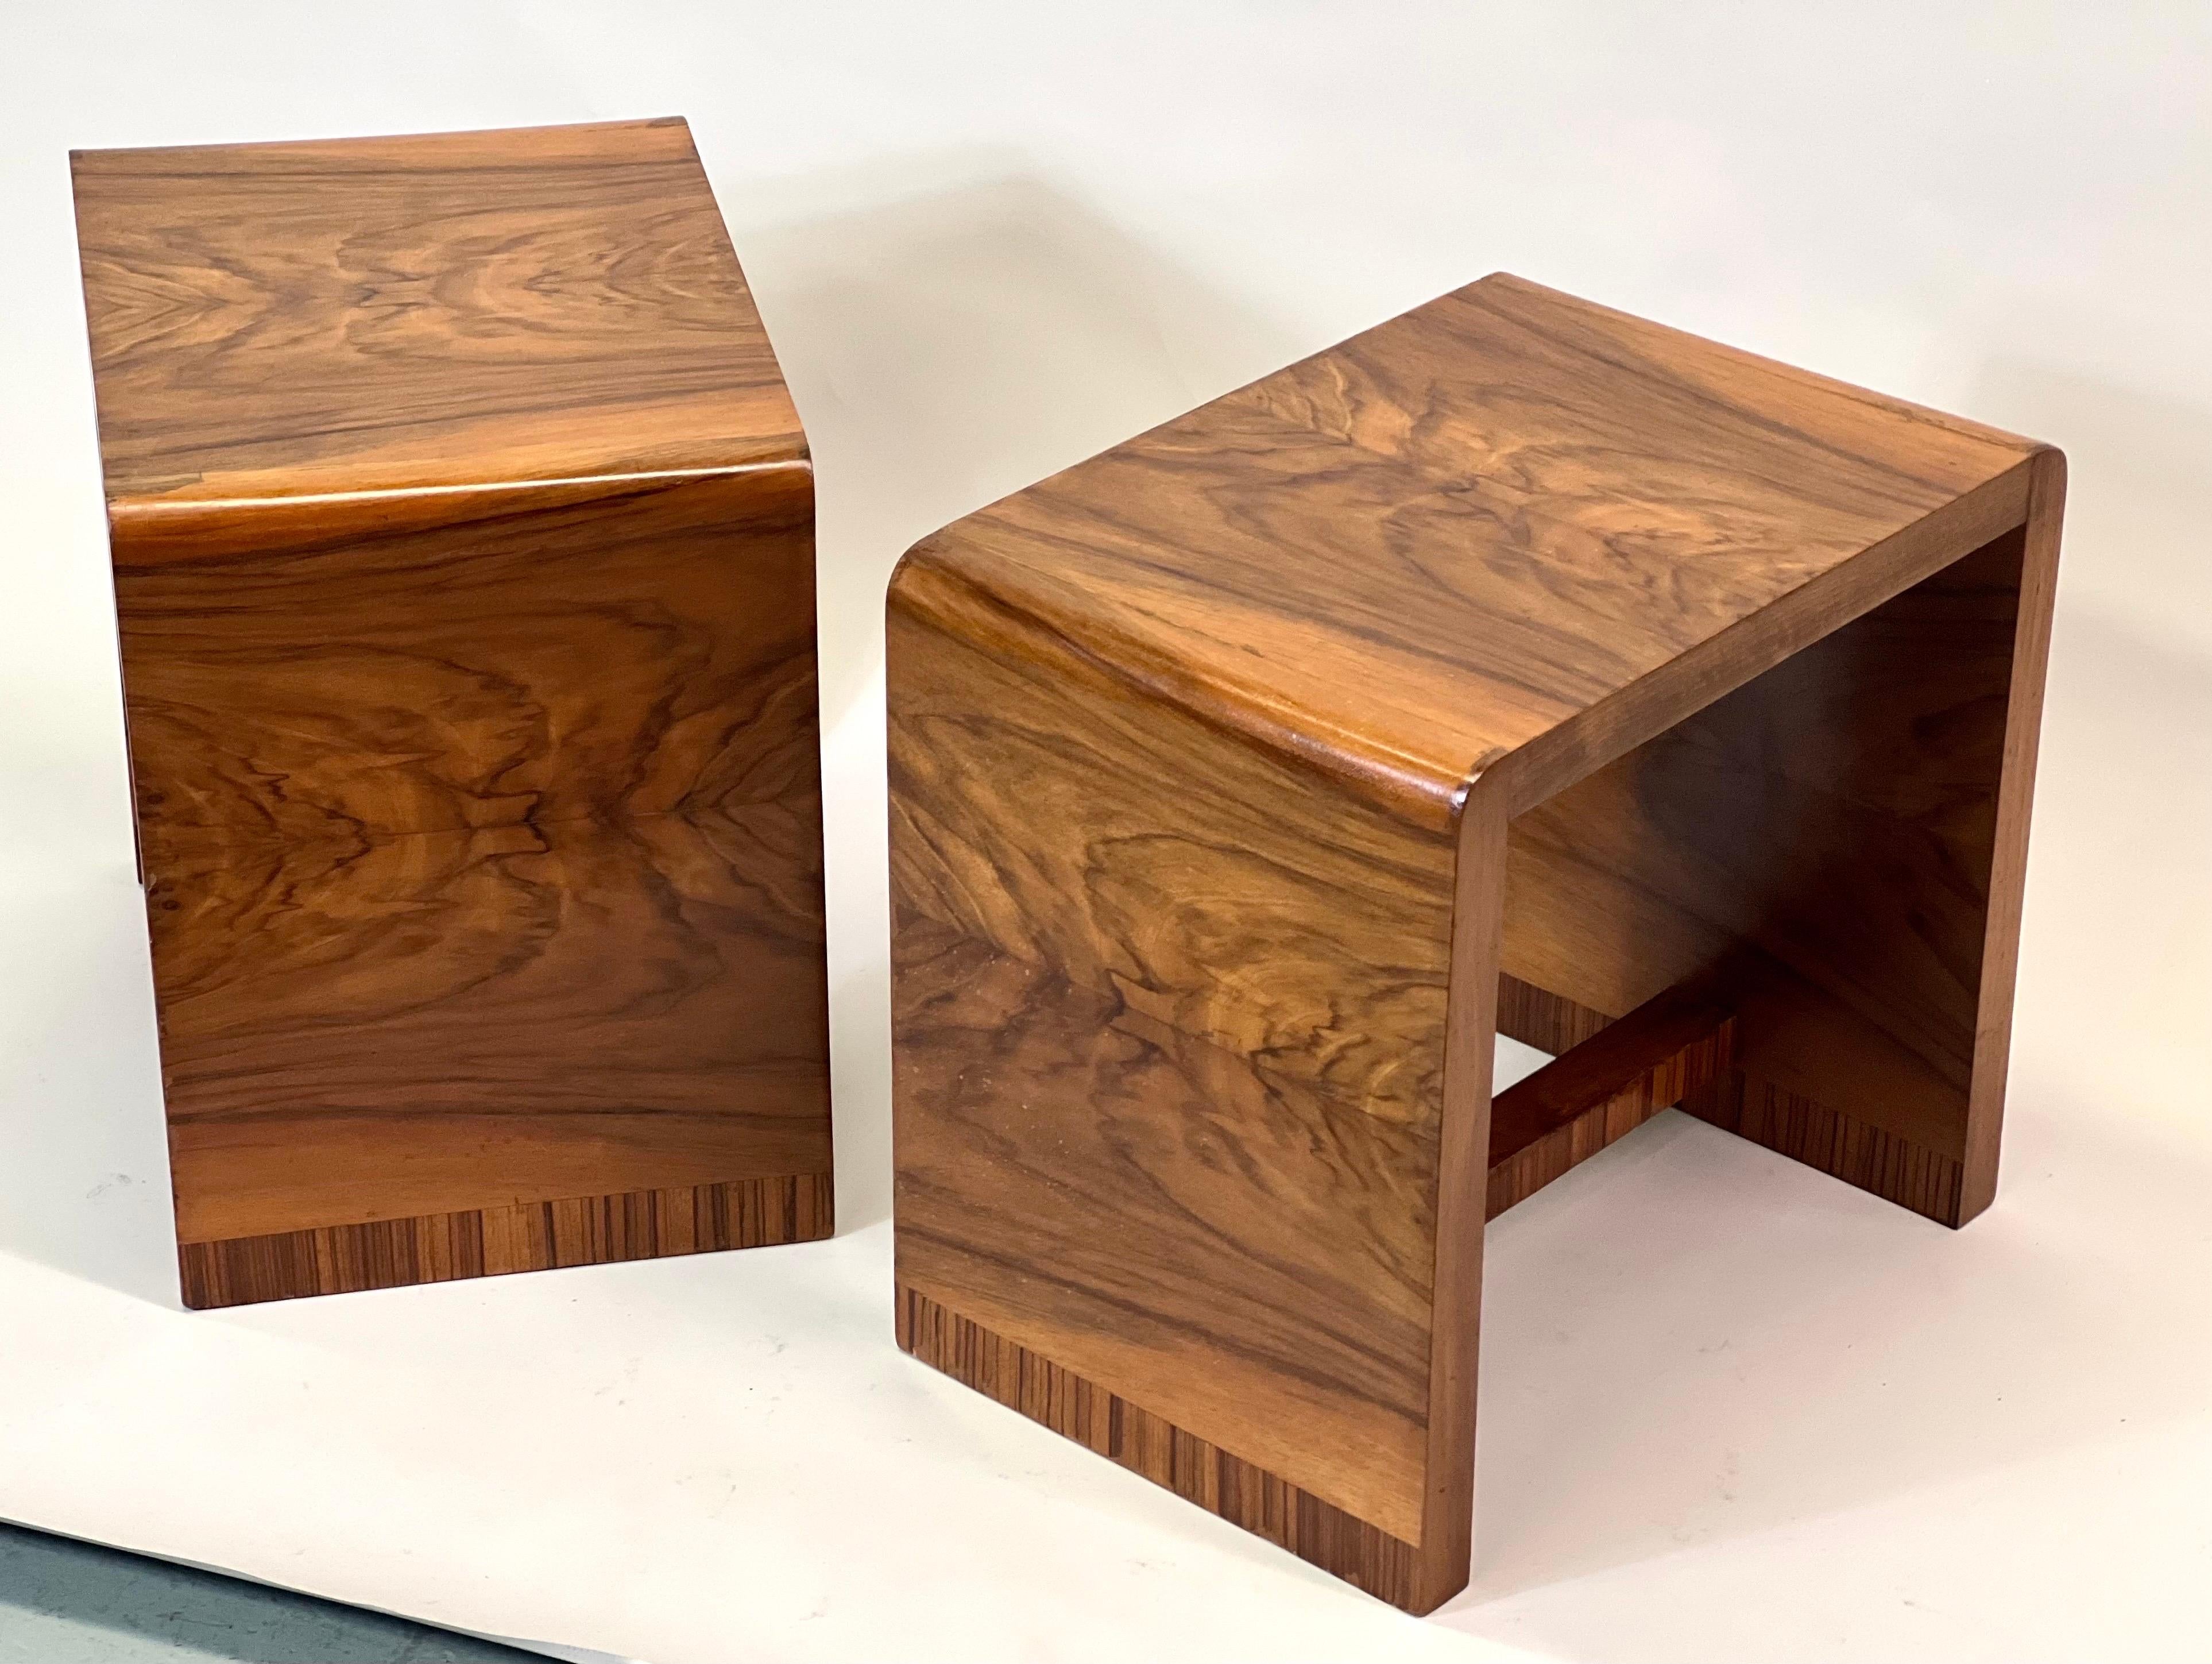 Pair Italian Mid-century Modern Rationalist Elm Wood Benches, Giuseppe Pagano  In Good Condition For Sale In New York, NY